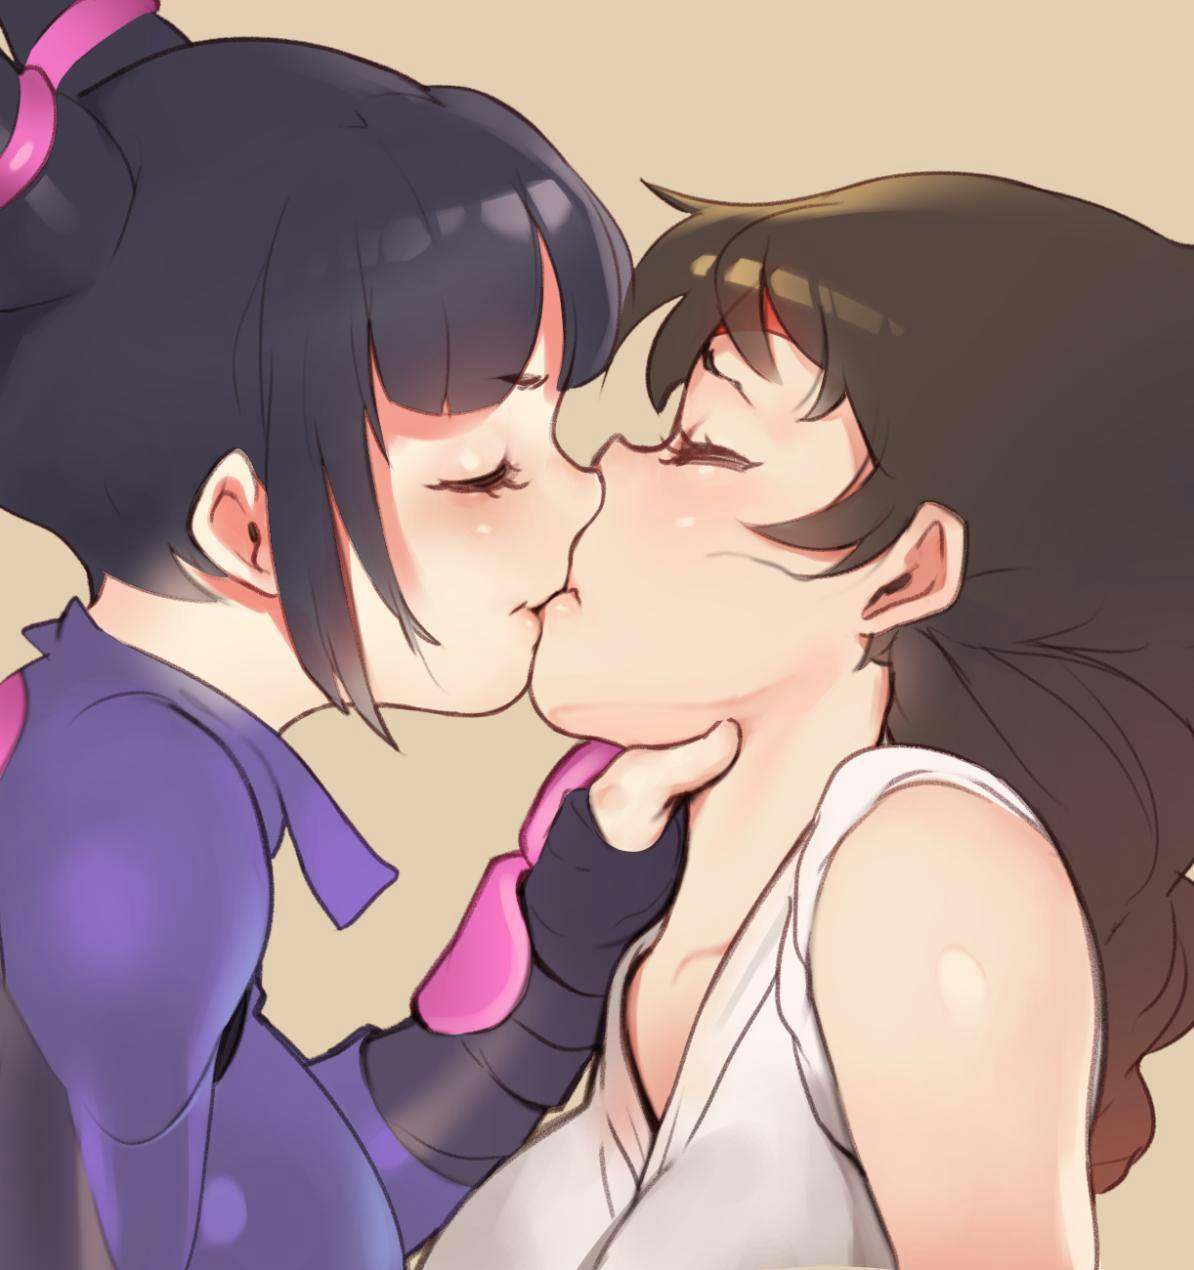 Tentacle Porn Anime Lesbian Kissing - Lesbian Hentai: Best Yuri Hentai to Read and Stream Online